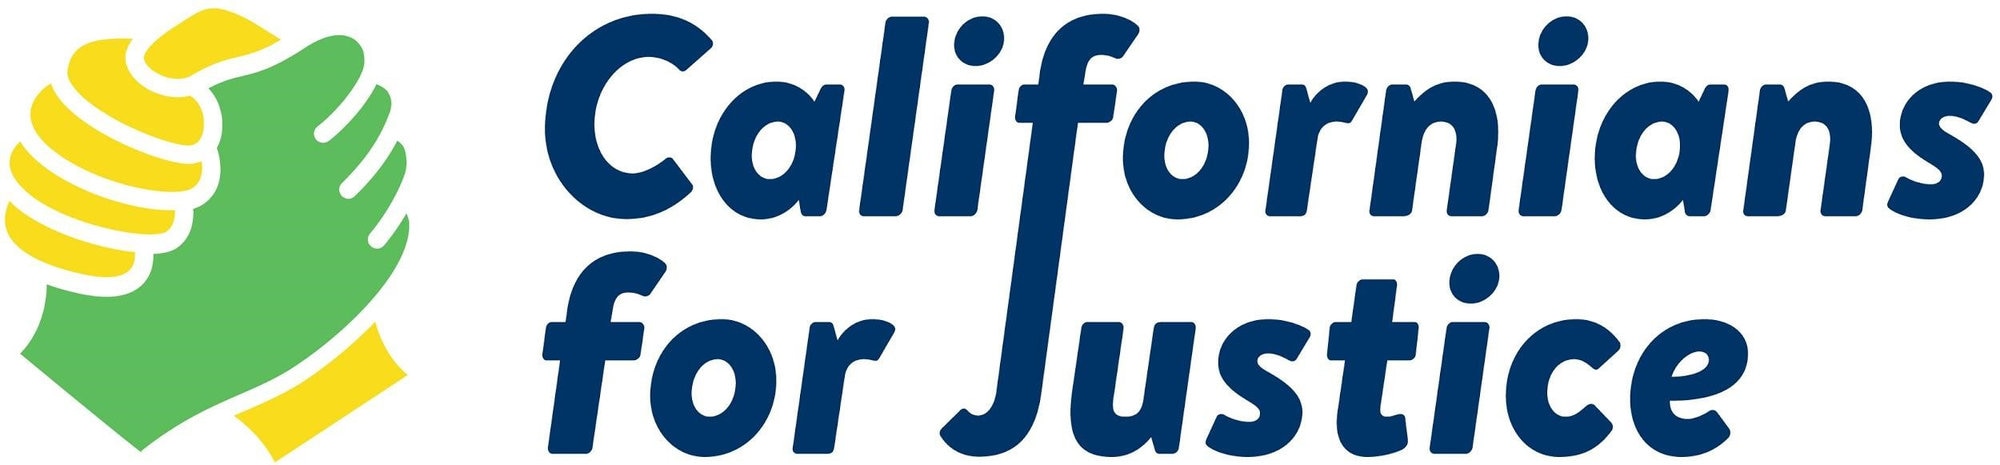 Californians for Justice Education Fund